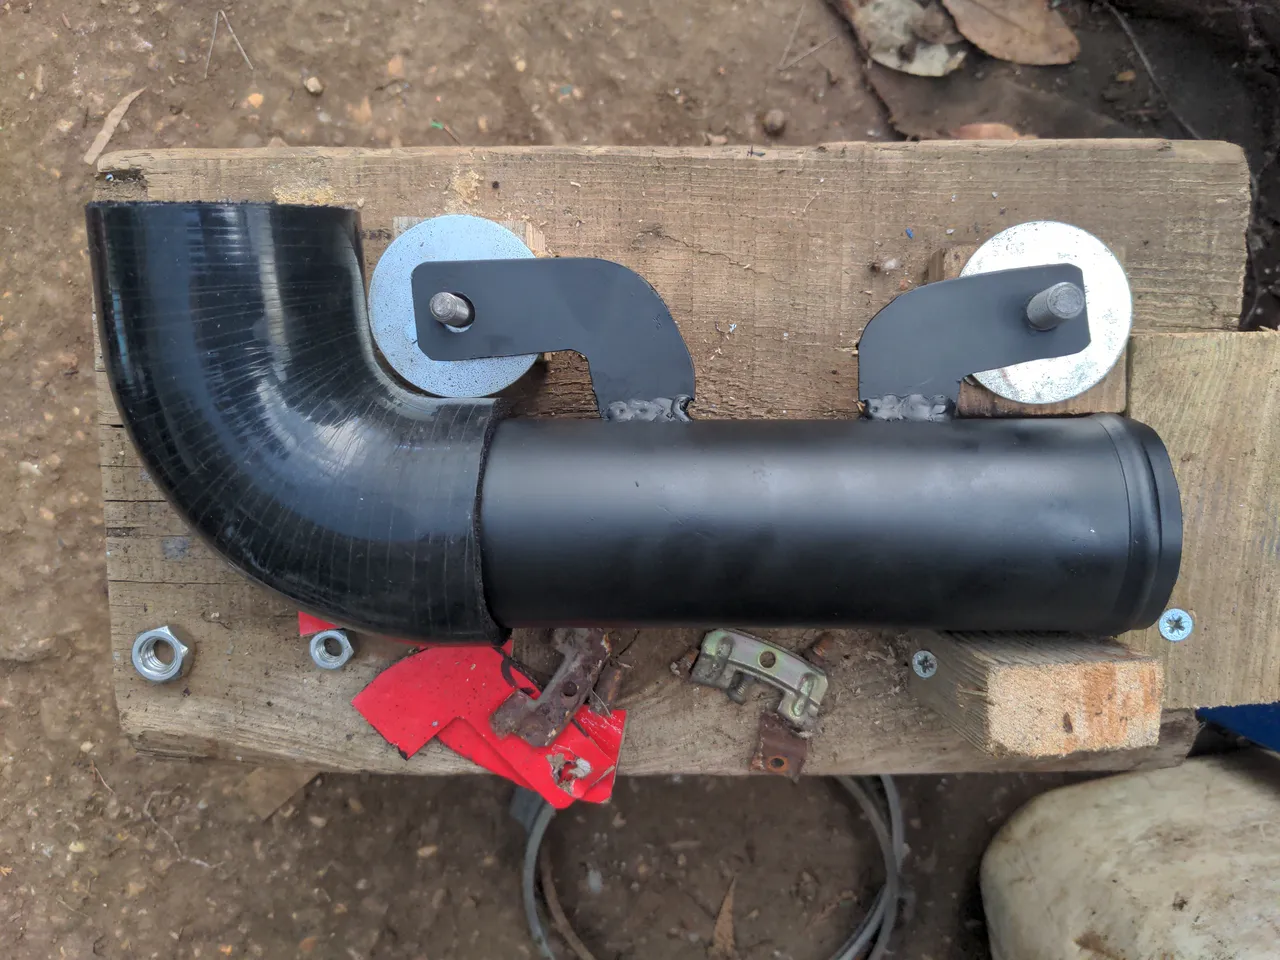 The completed steel intake pipe. Instead of a 90 degree bend in the pipe itself, it now has a 90 degree silicone hose fitted. The steel part is painted black.